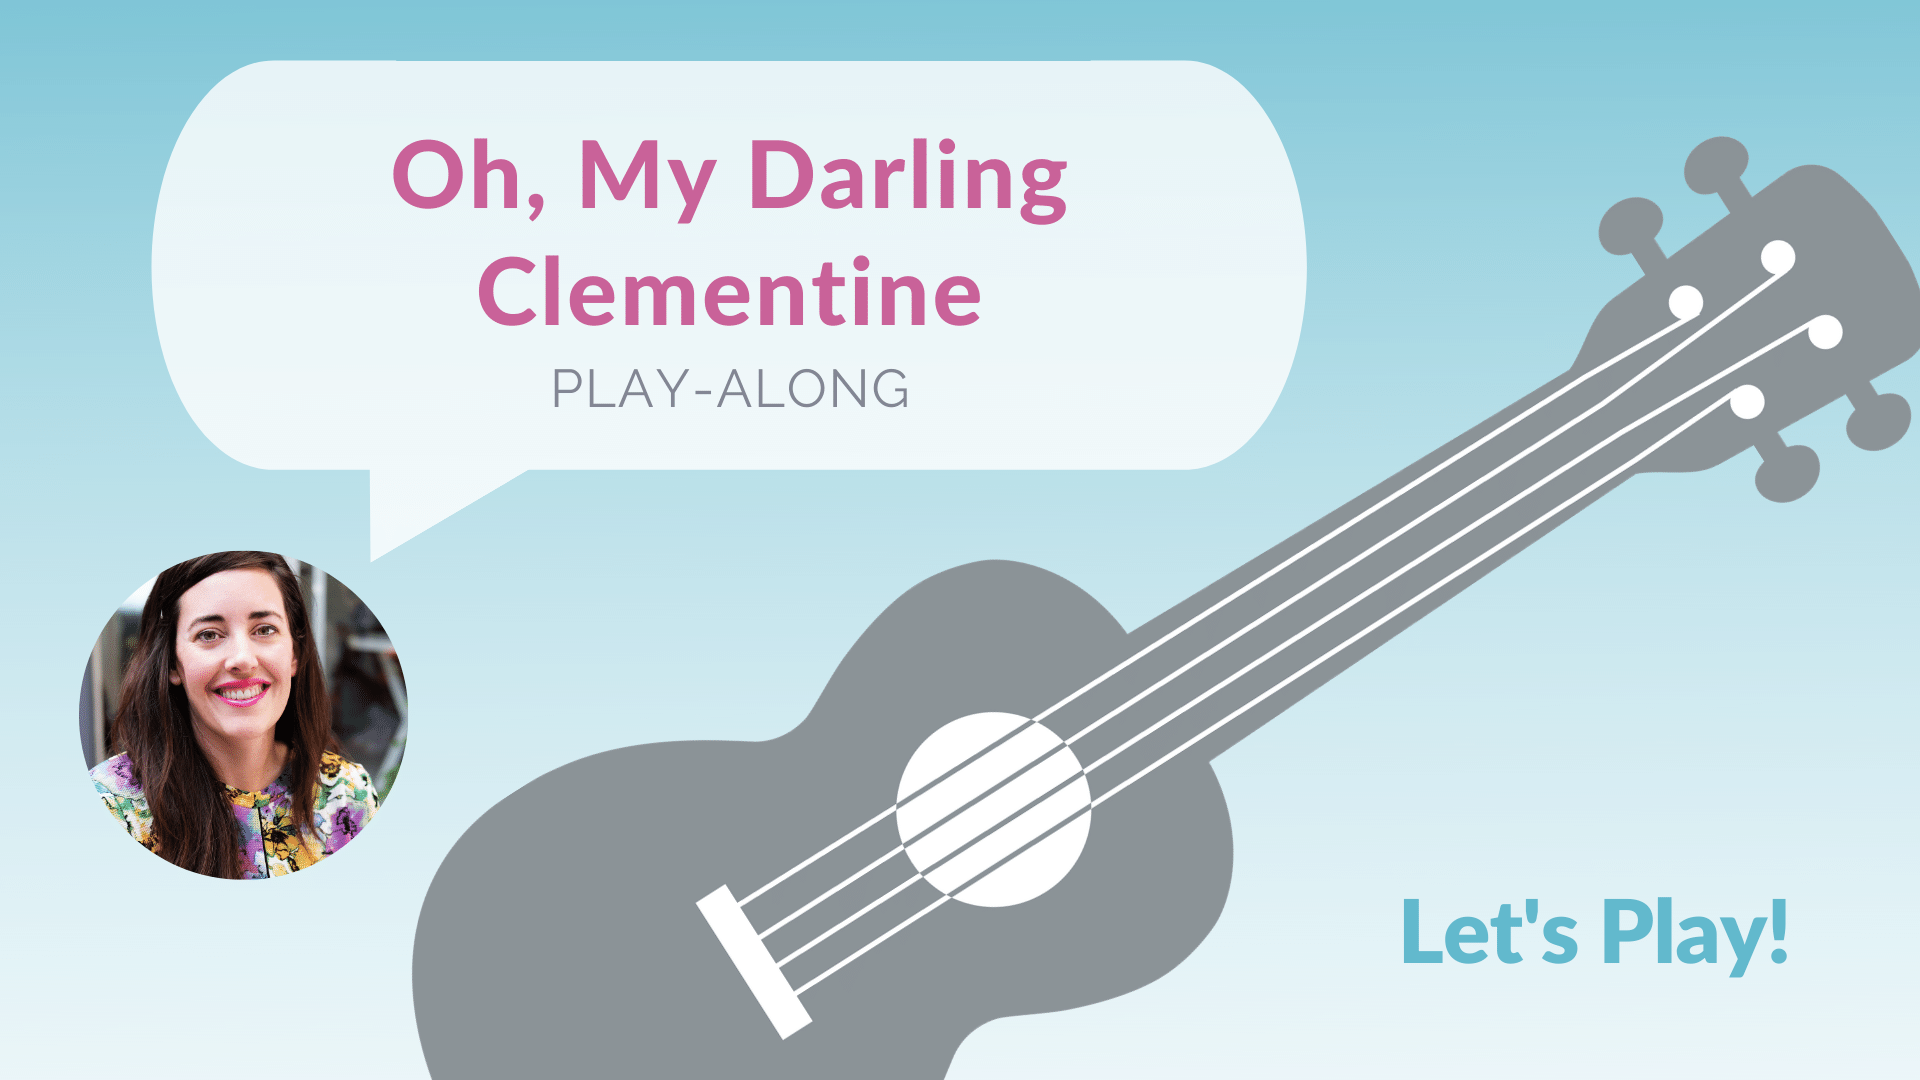 Oh, My Darling Clementine